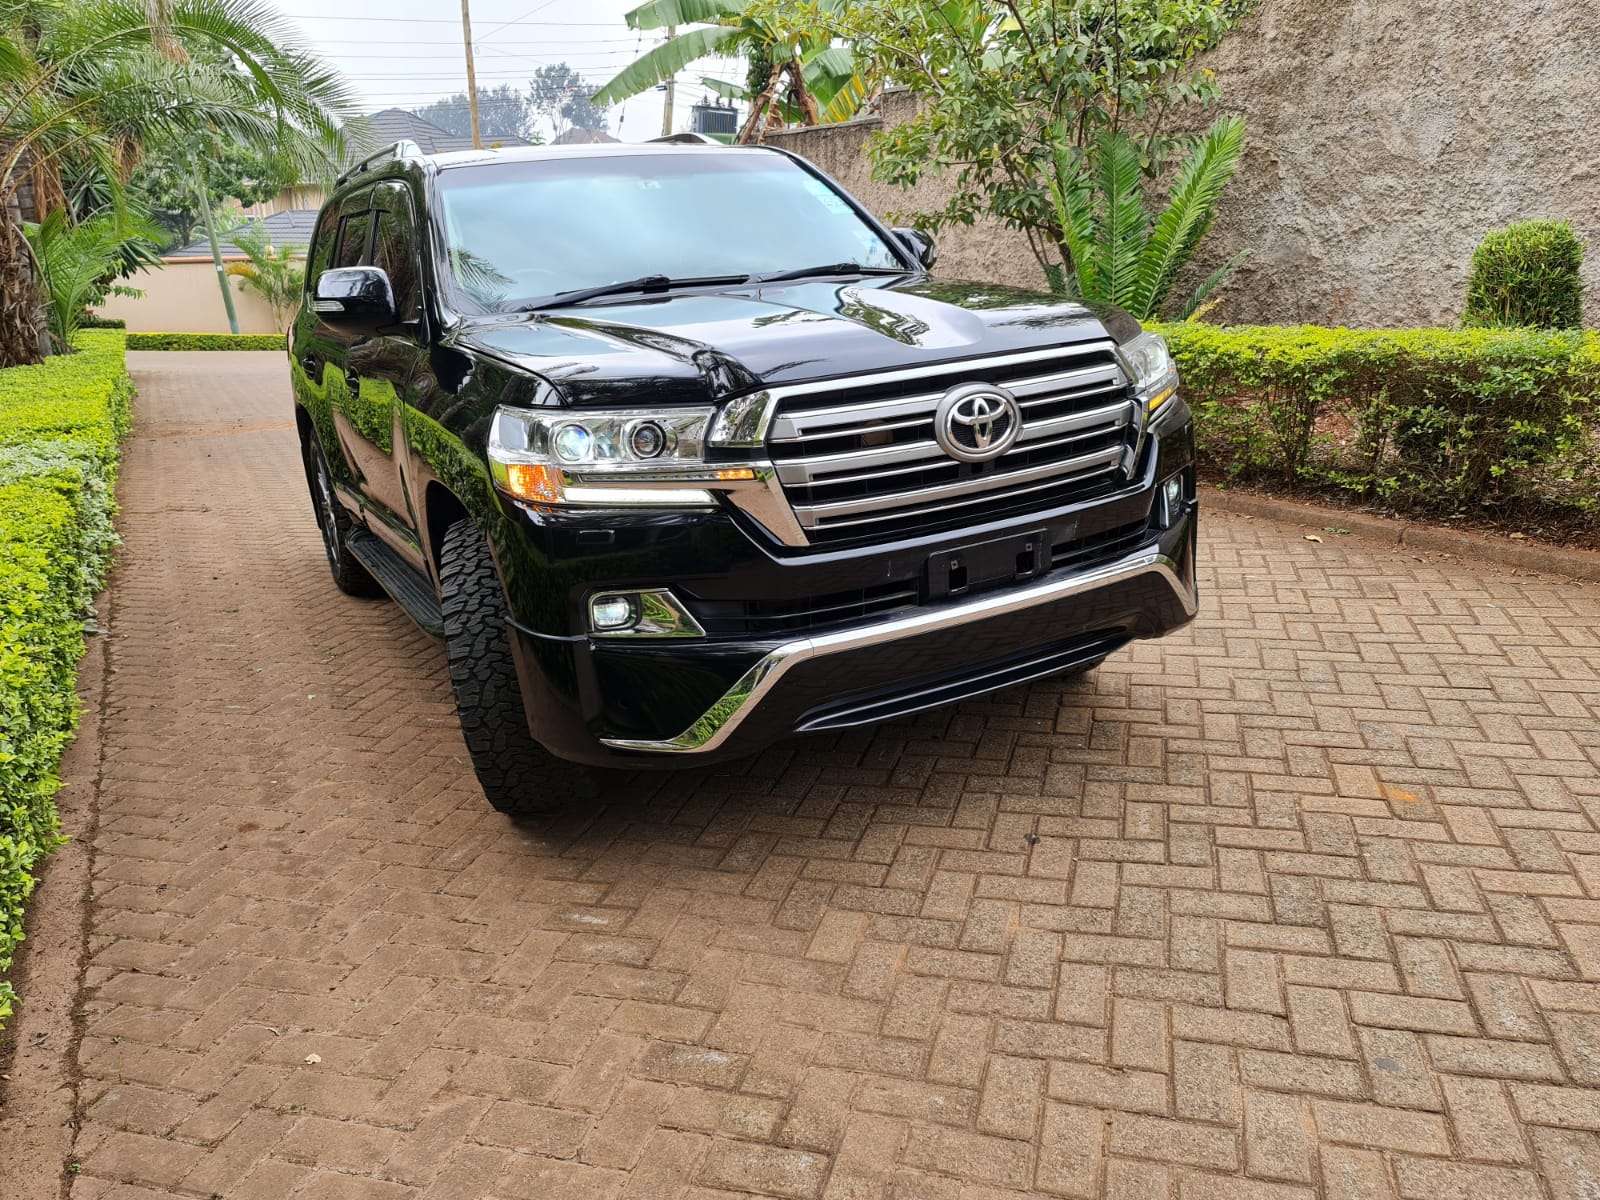 Toyota Land cruiser V8 2009 as New Hot Deal pay 20%